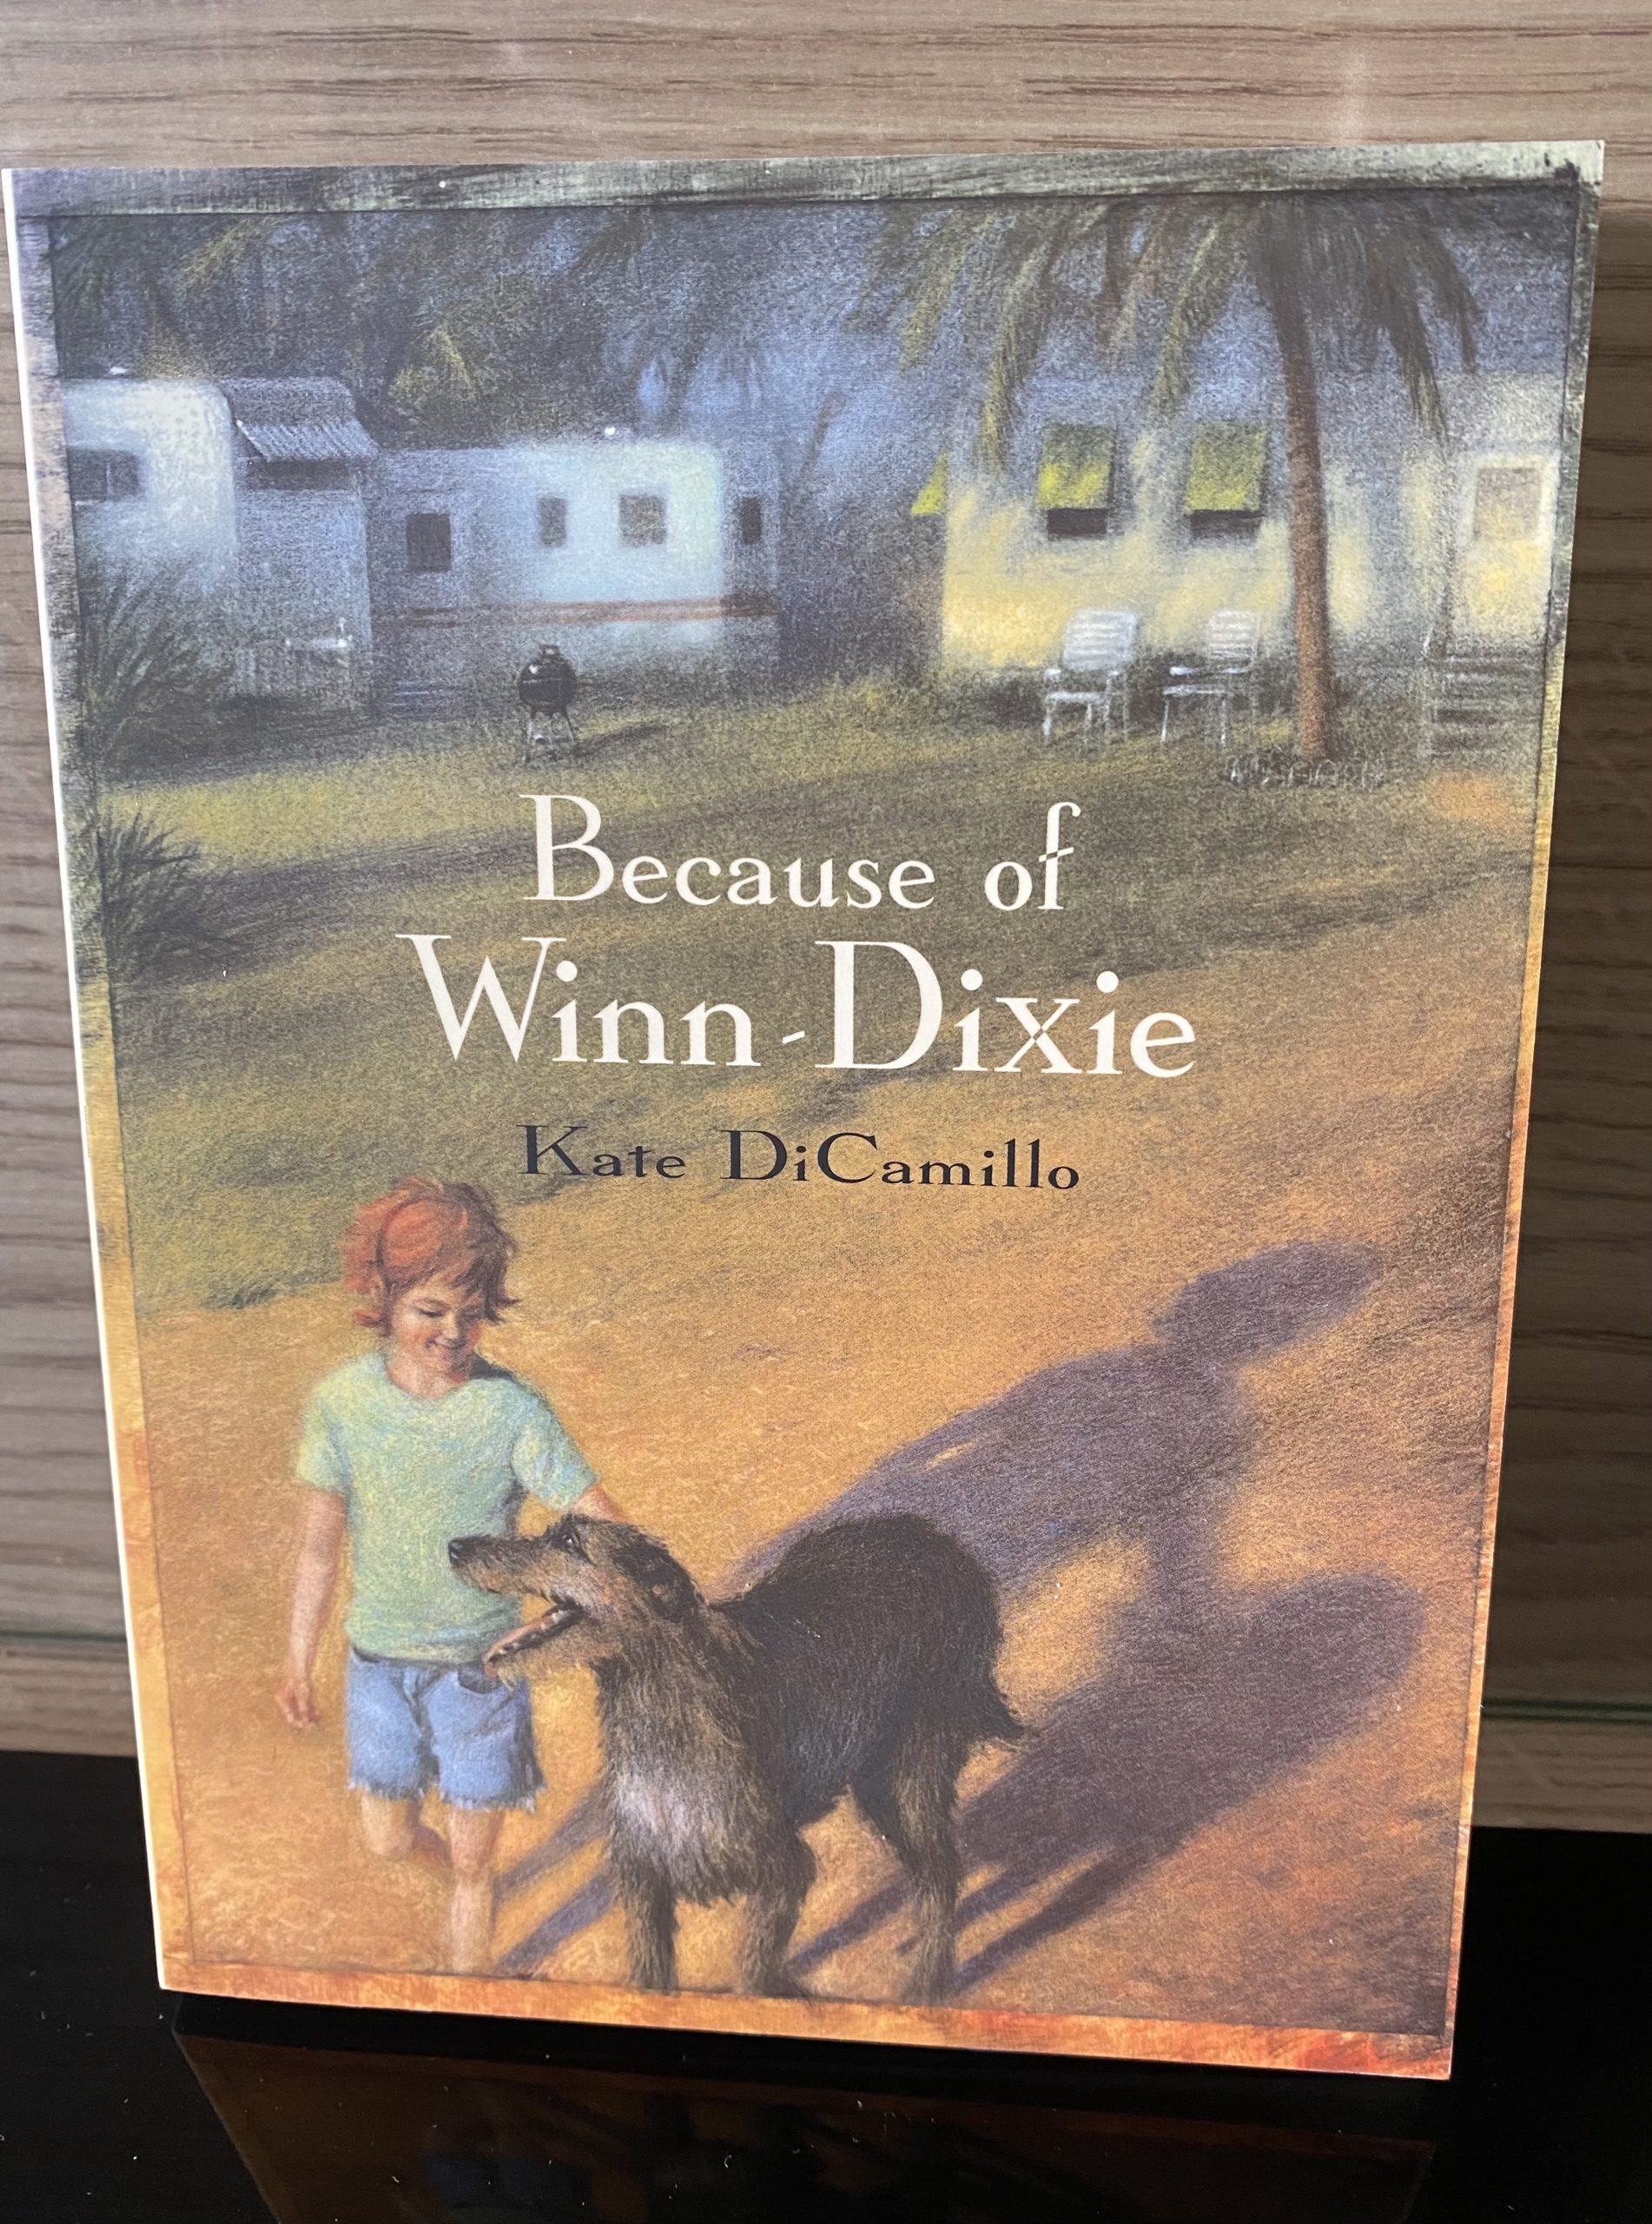 Because of Winn-Dixie by Kate DiCamillo (25)